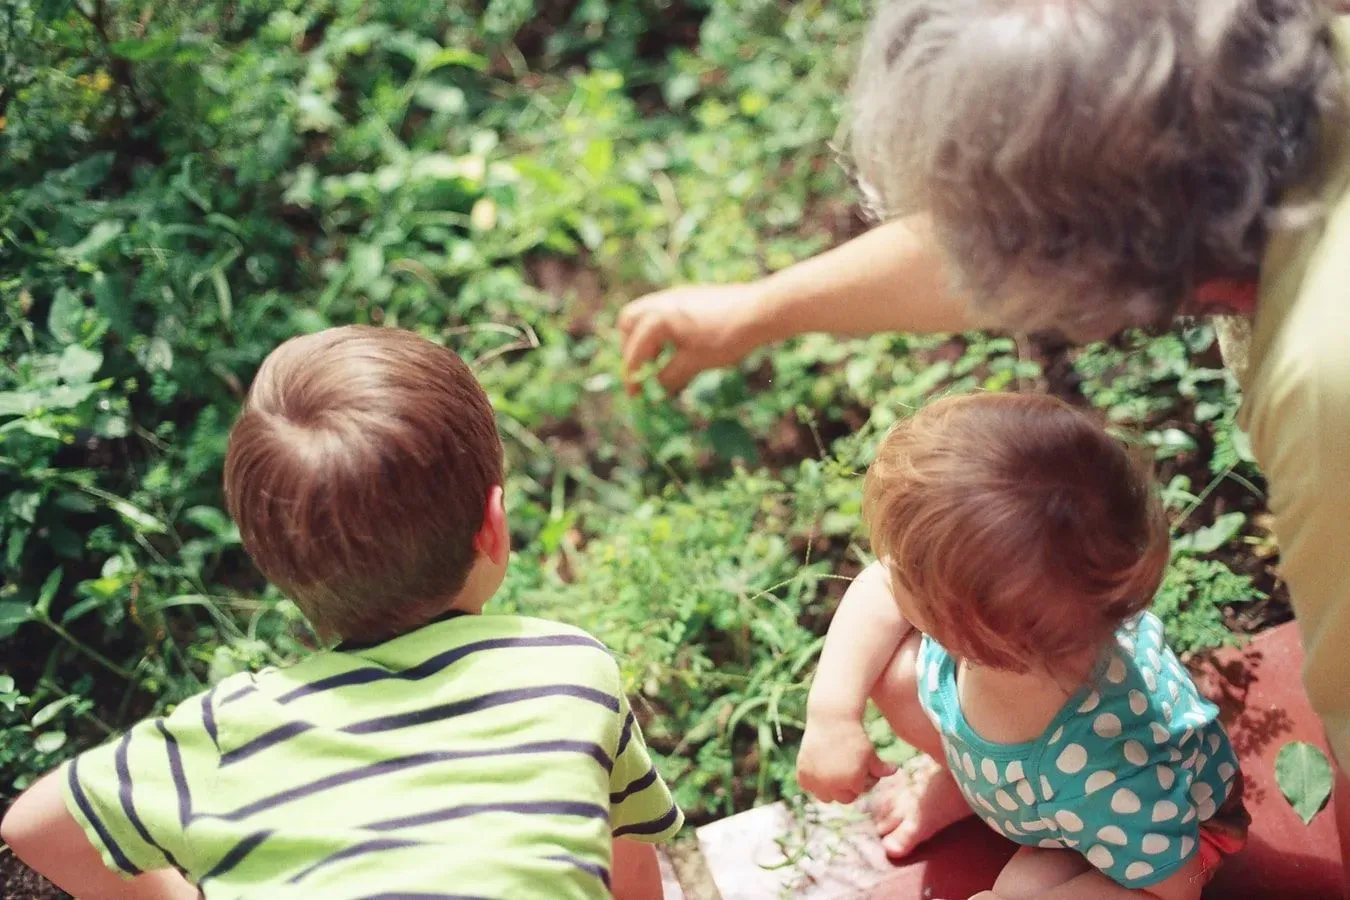 It's a good idea to keep grandparents involved with activities.